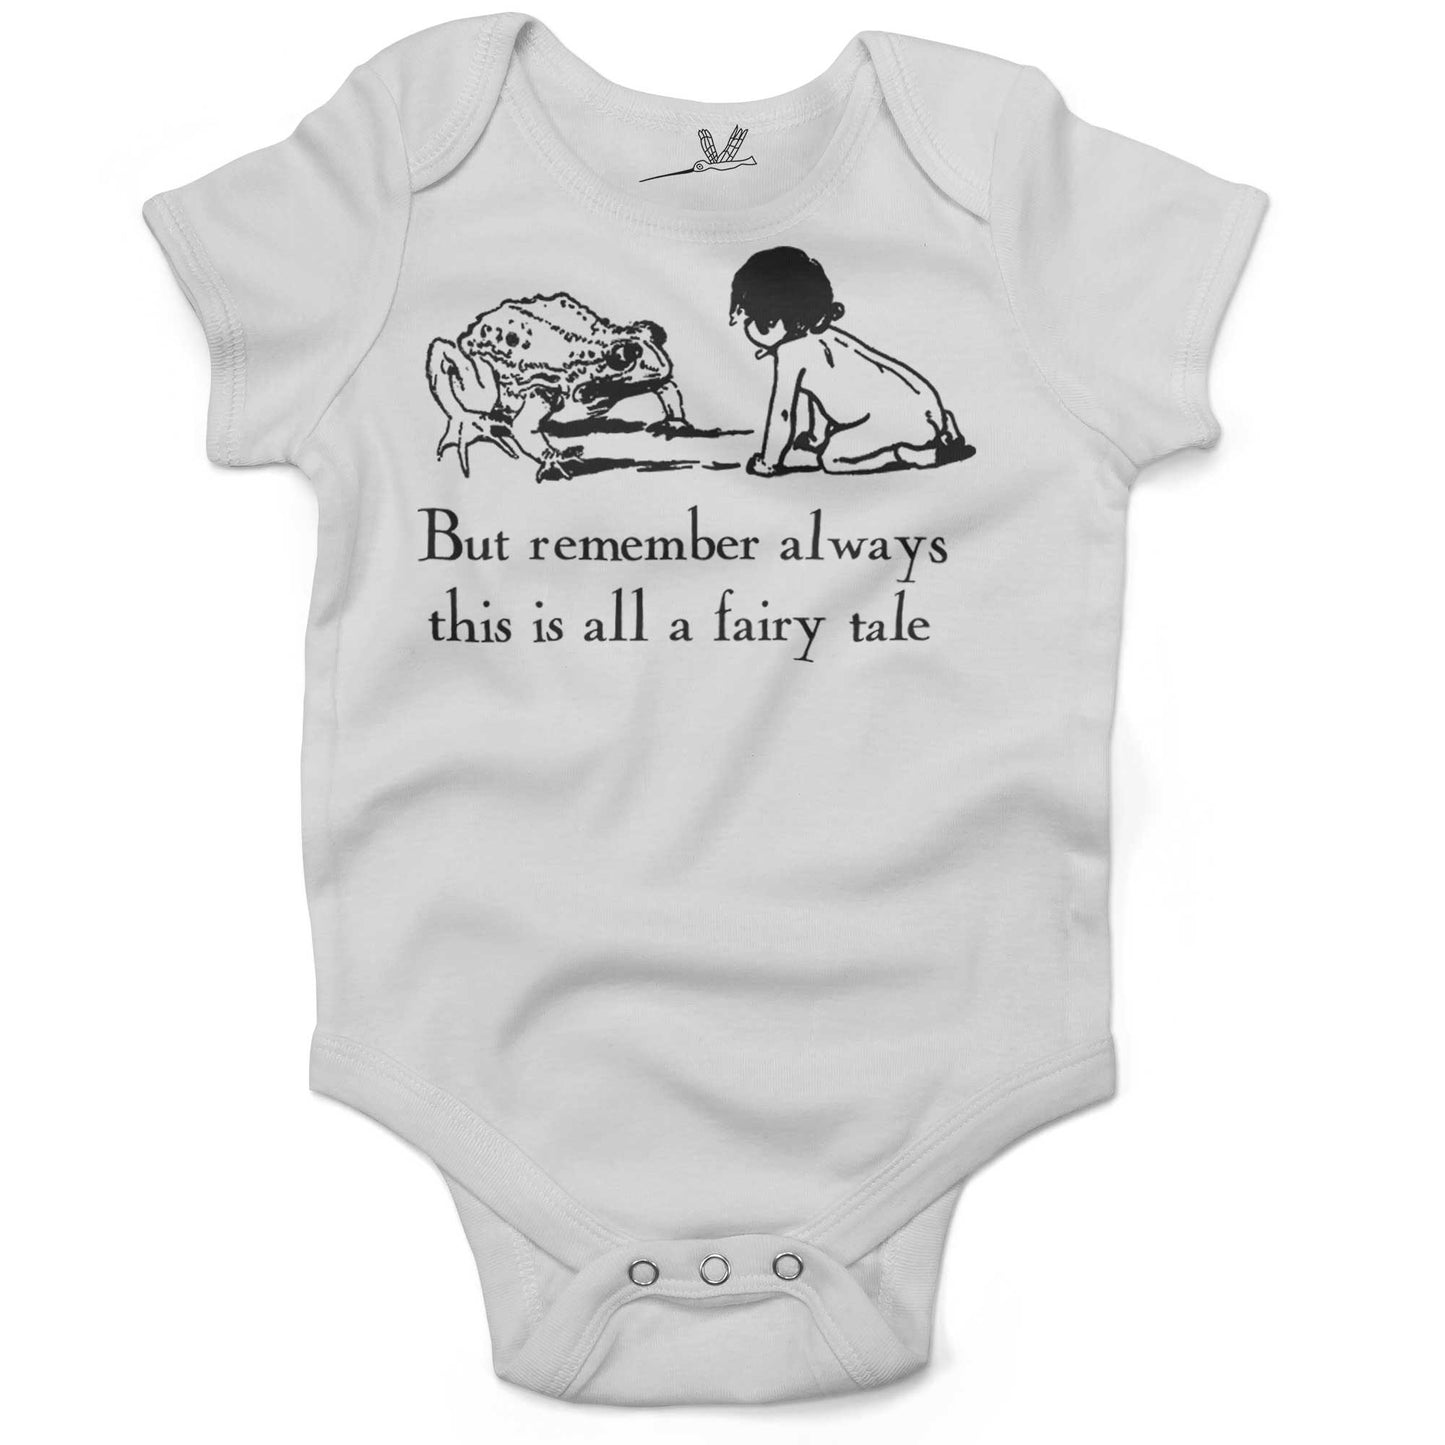 But Remember, This Is All A Fairy Tale Infant Bodysuit or Raglan Tee-White-3-6 months